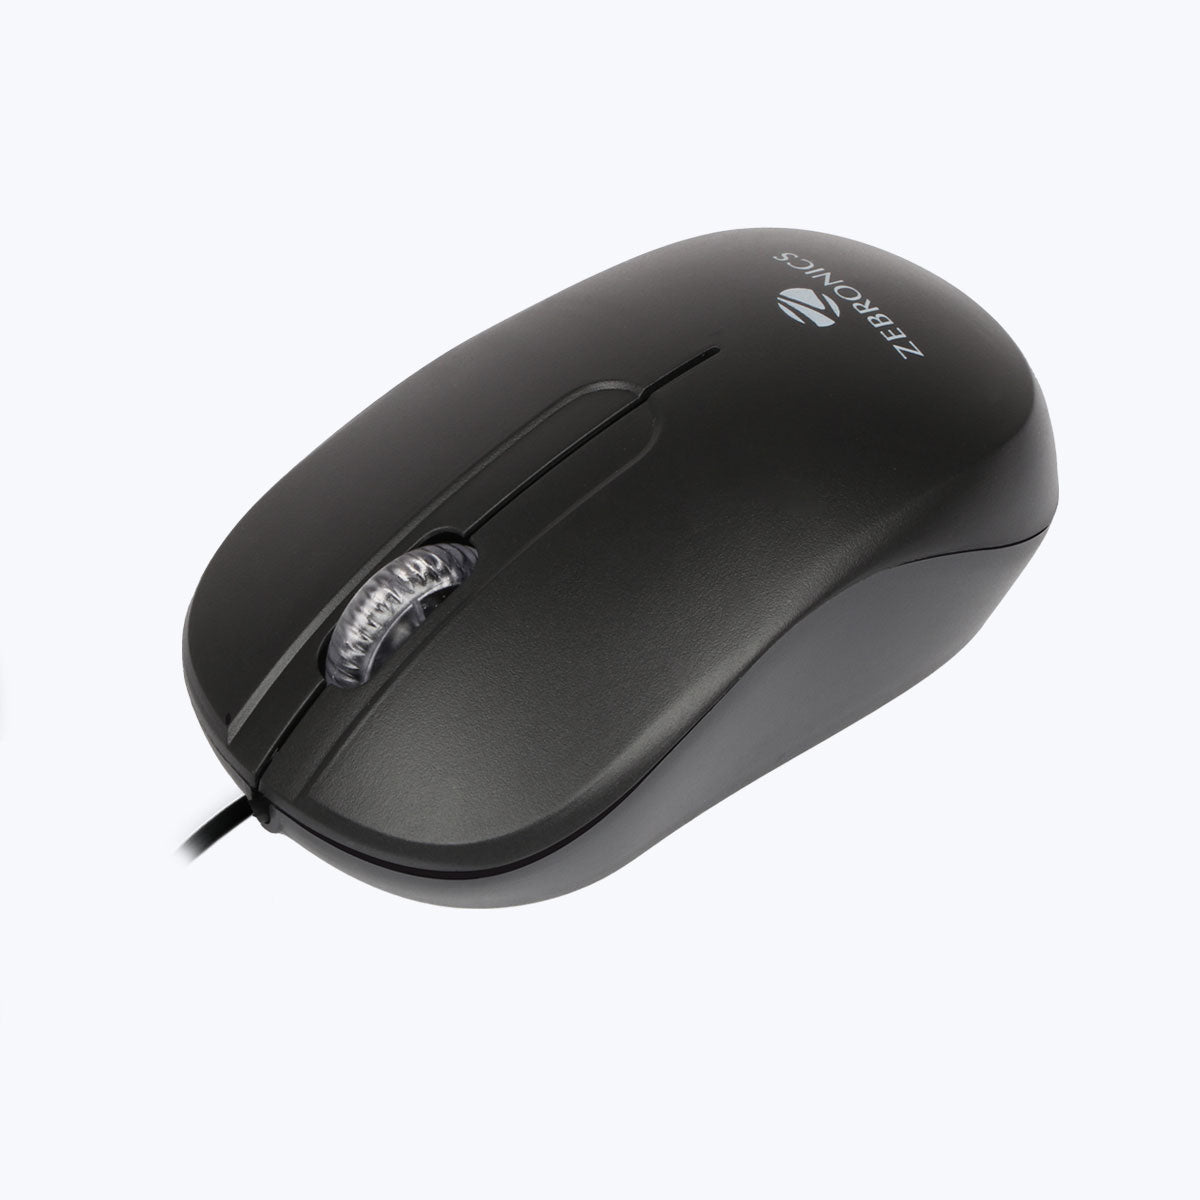 Zeb Sprint - Wired Mouse - Zebronics